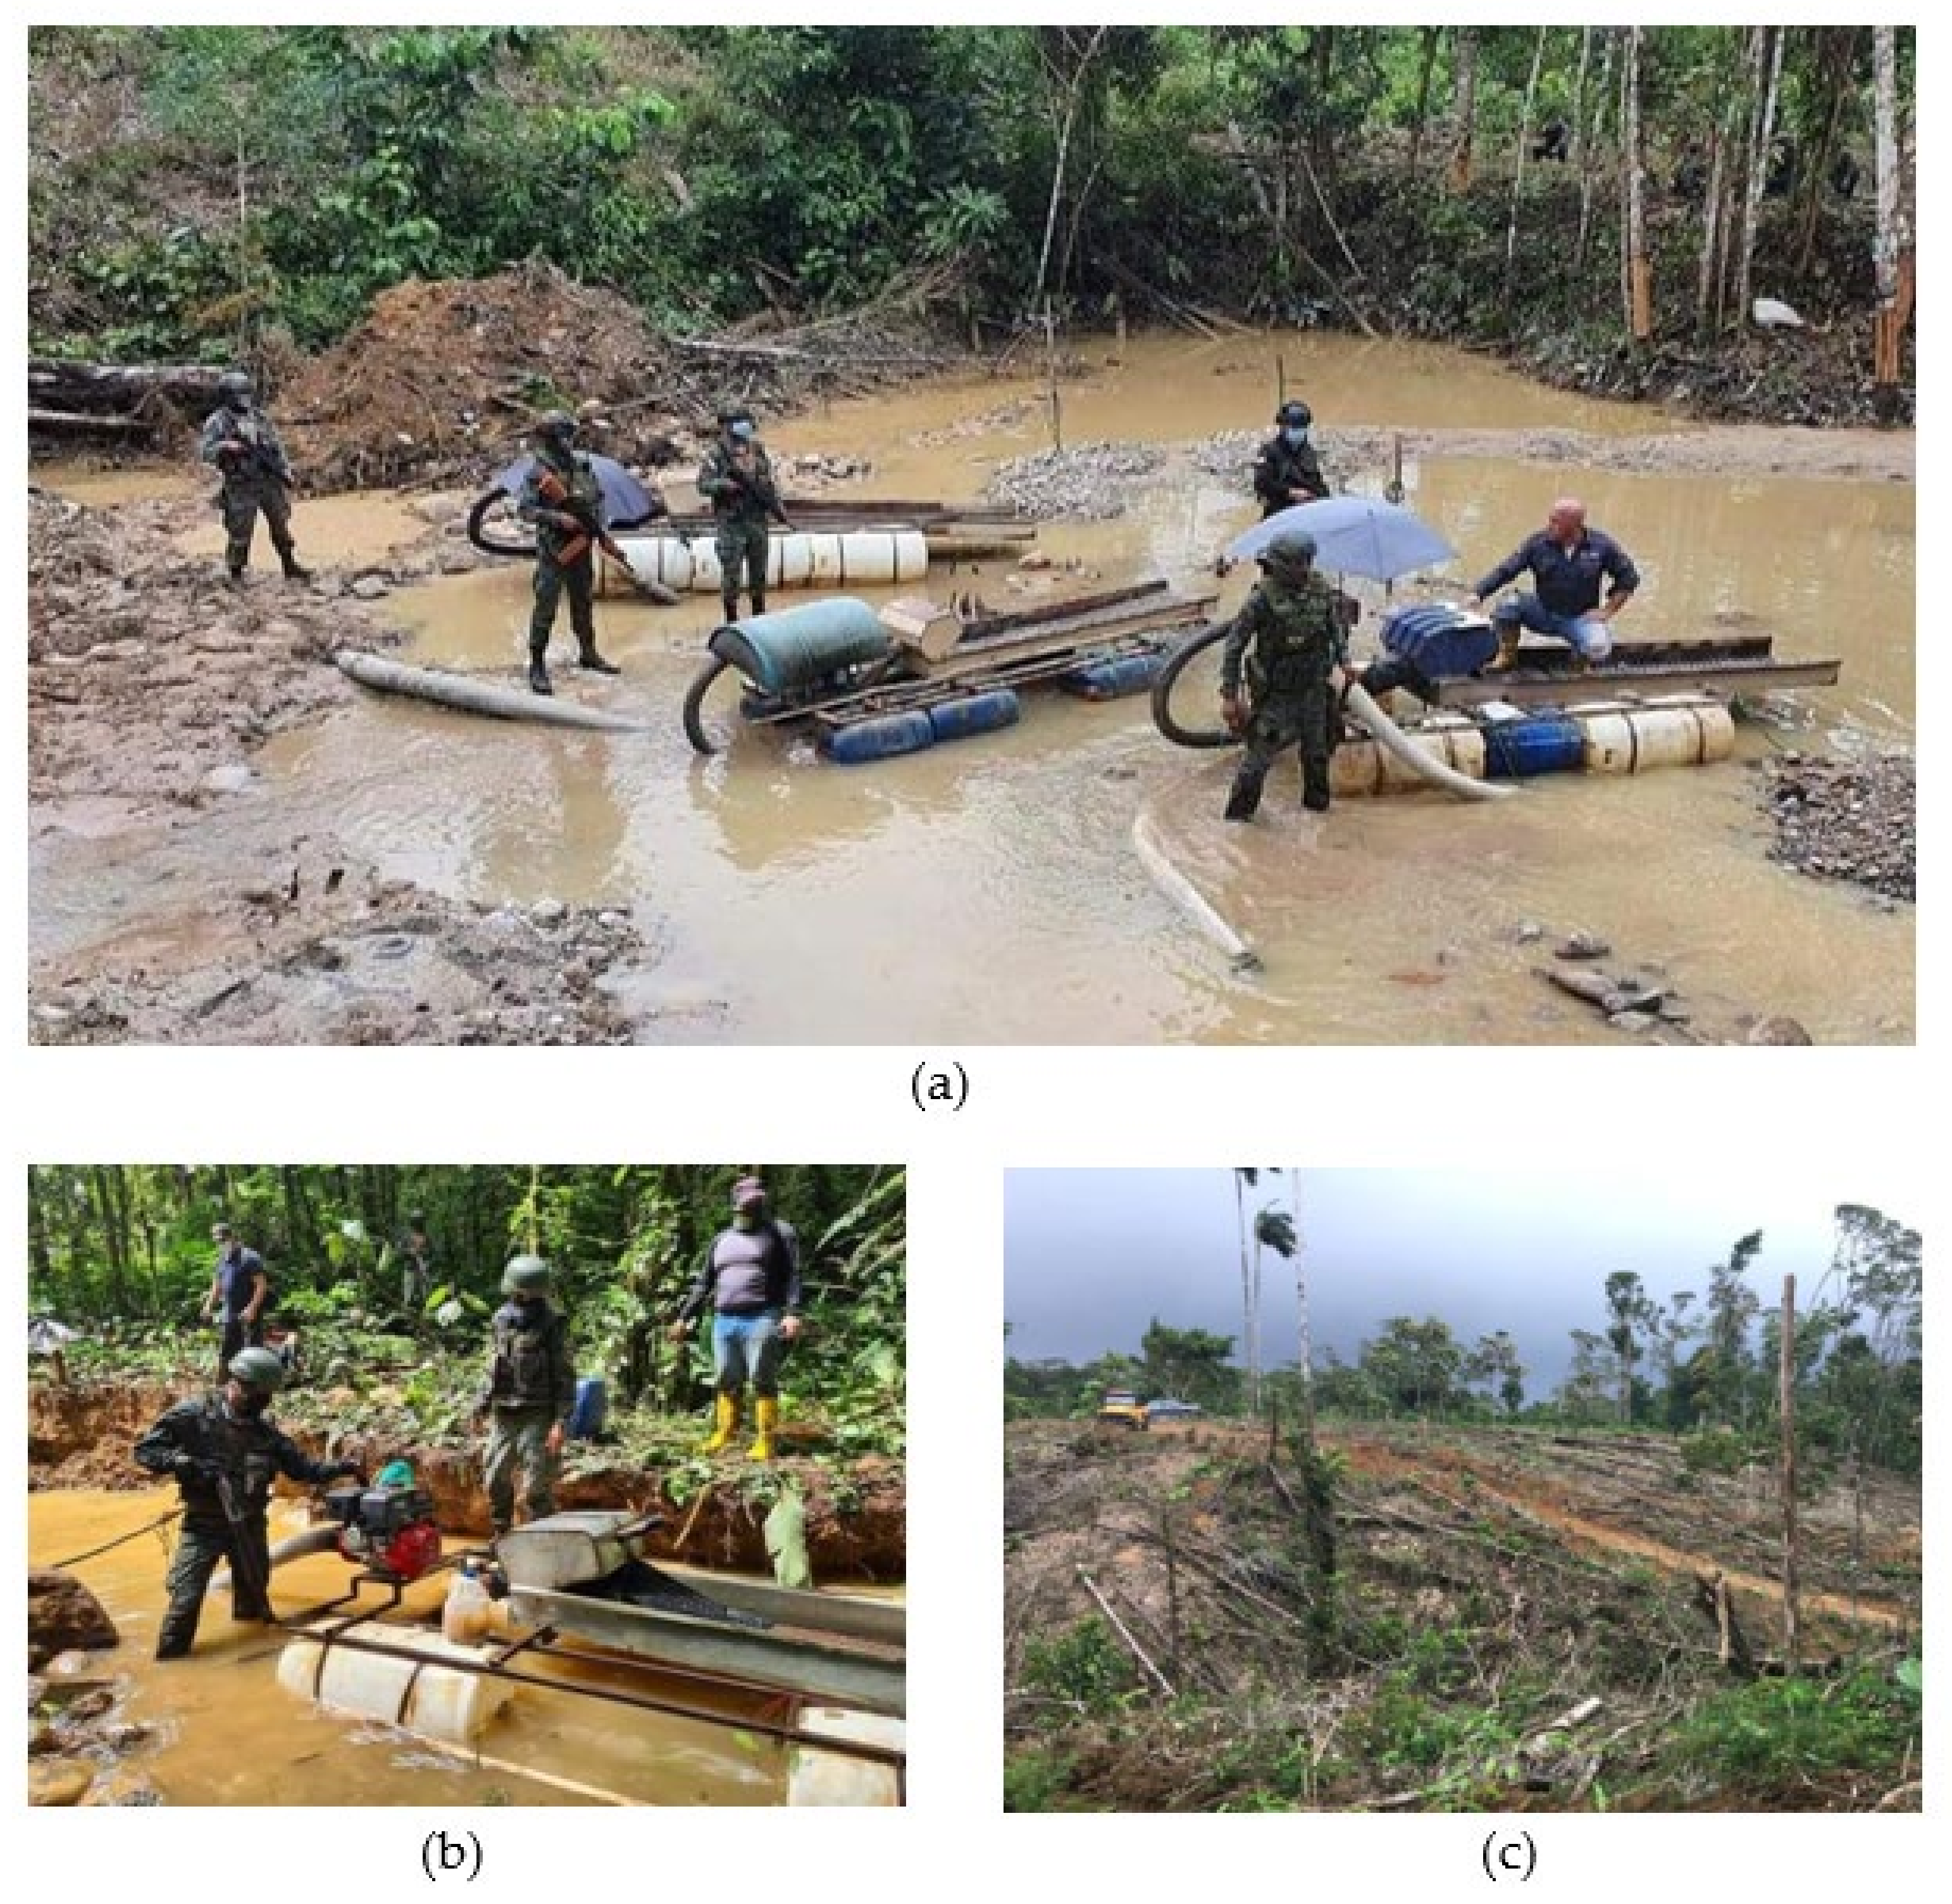 Land | Free Full-Text | Gold Mining in the Amazon Region of Ecuador:  History and a Review of Its Socio-Environmental Impacts